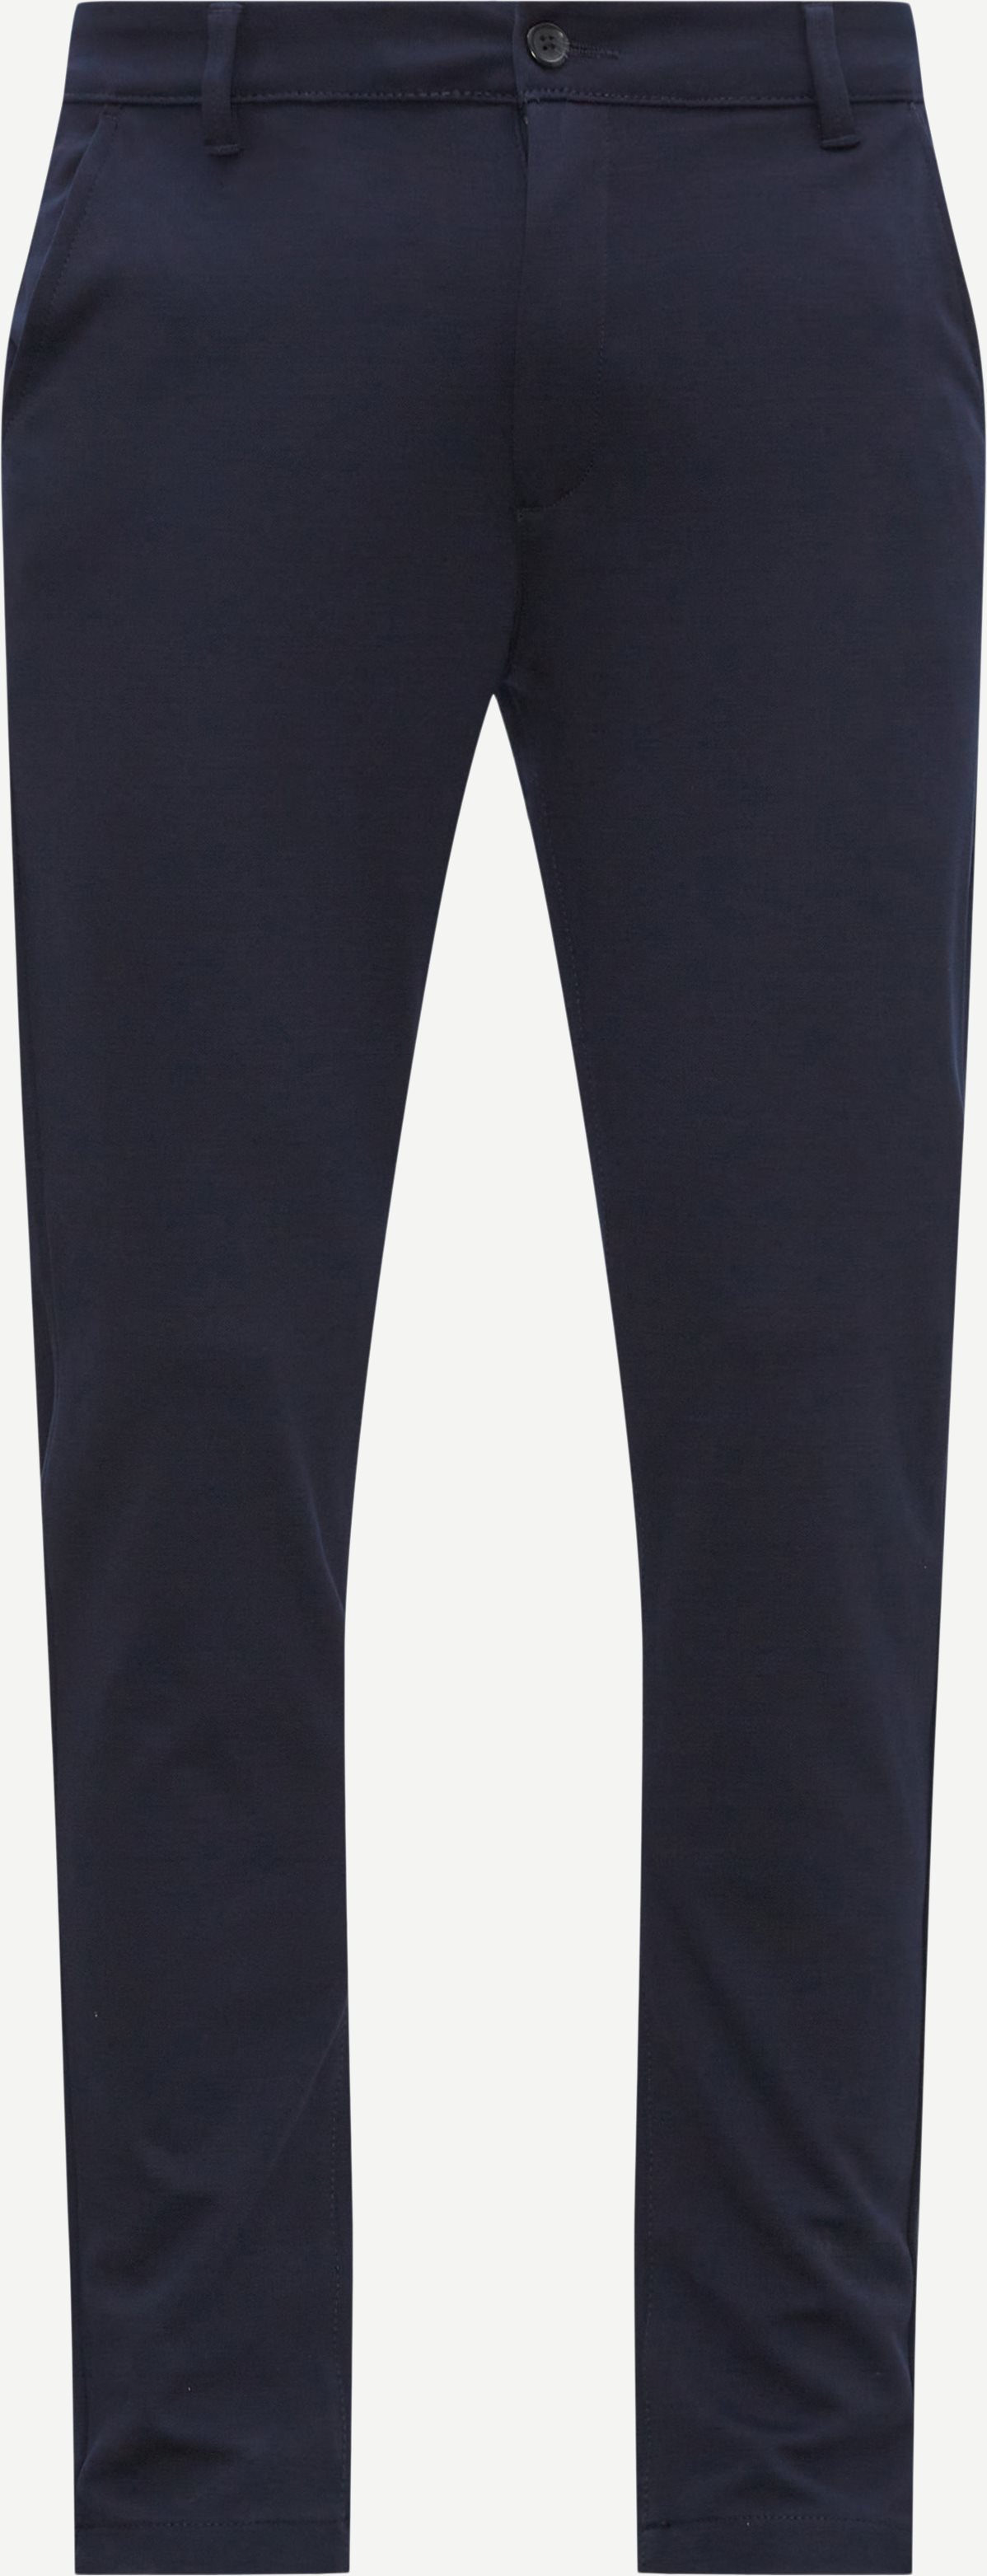 ICELAND Trousers TOTTI Blue